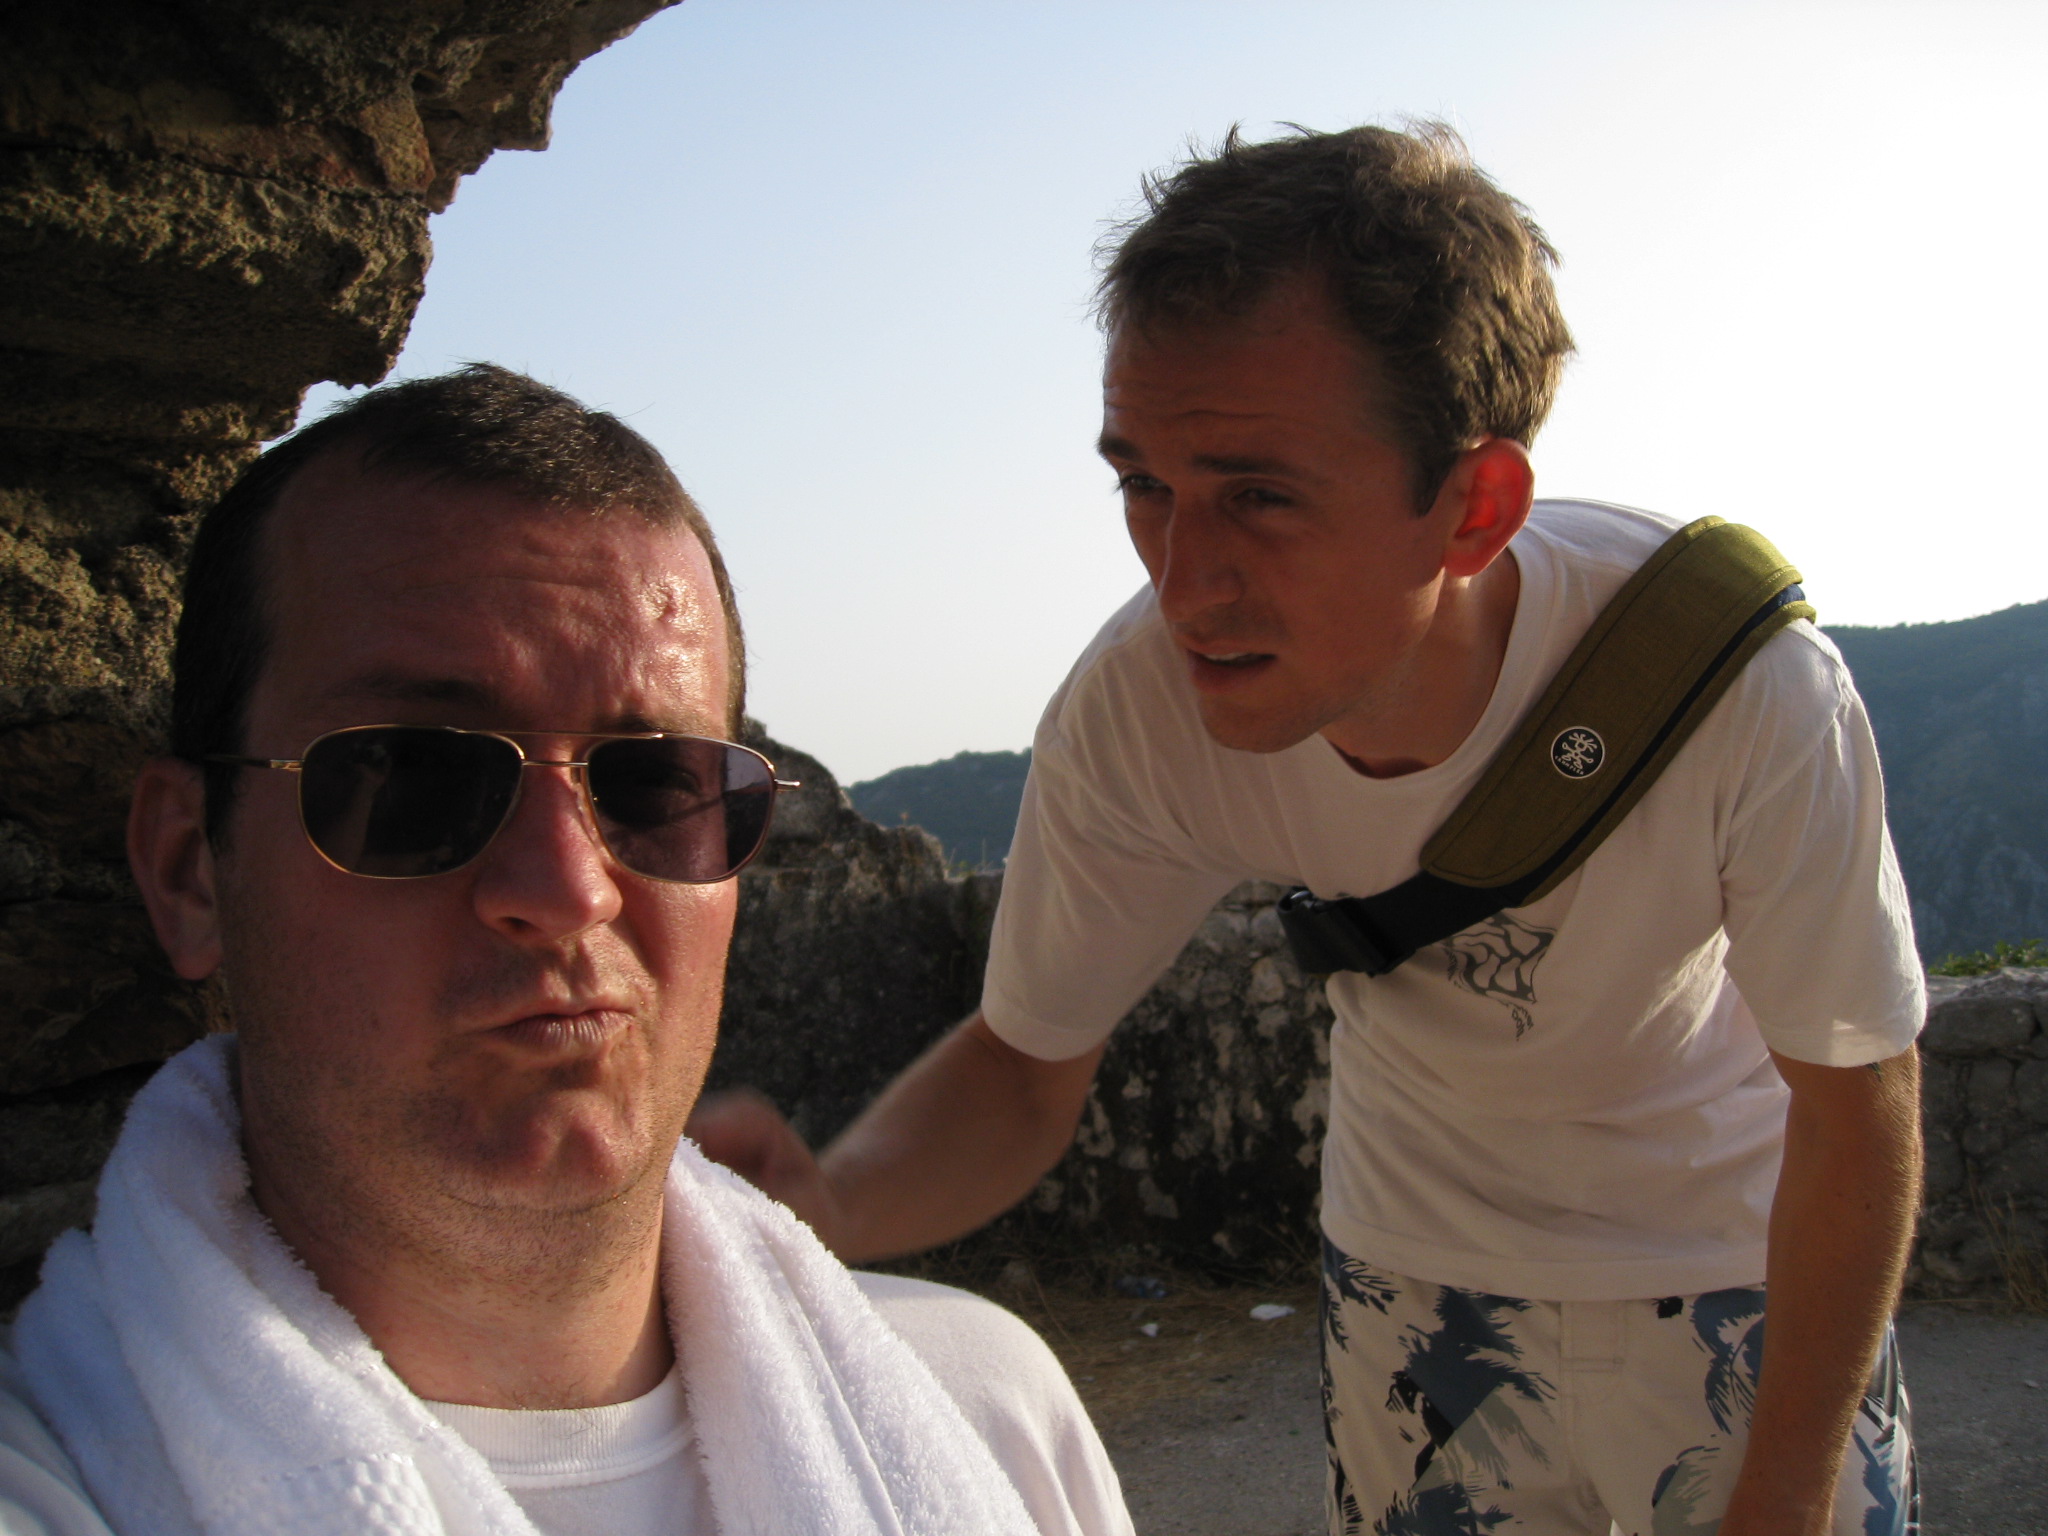 a man in a towel and sunglasses holds out his camera to an older man in a white shirt